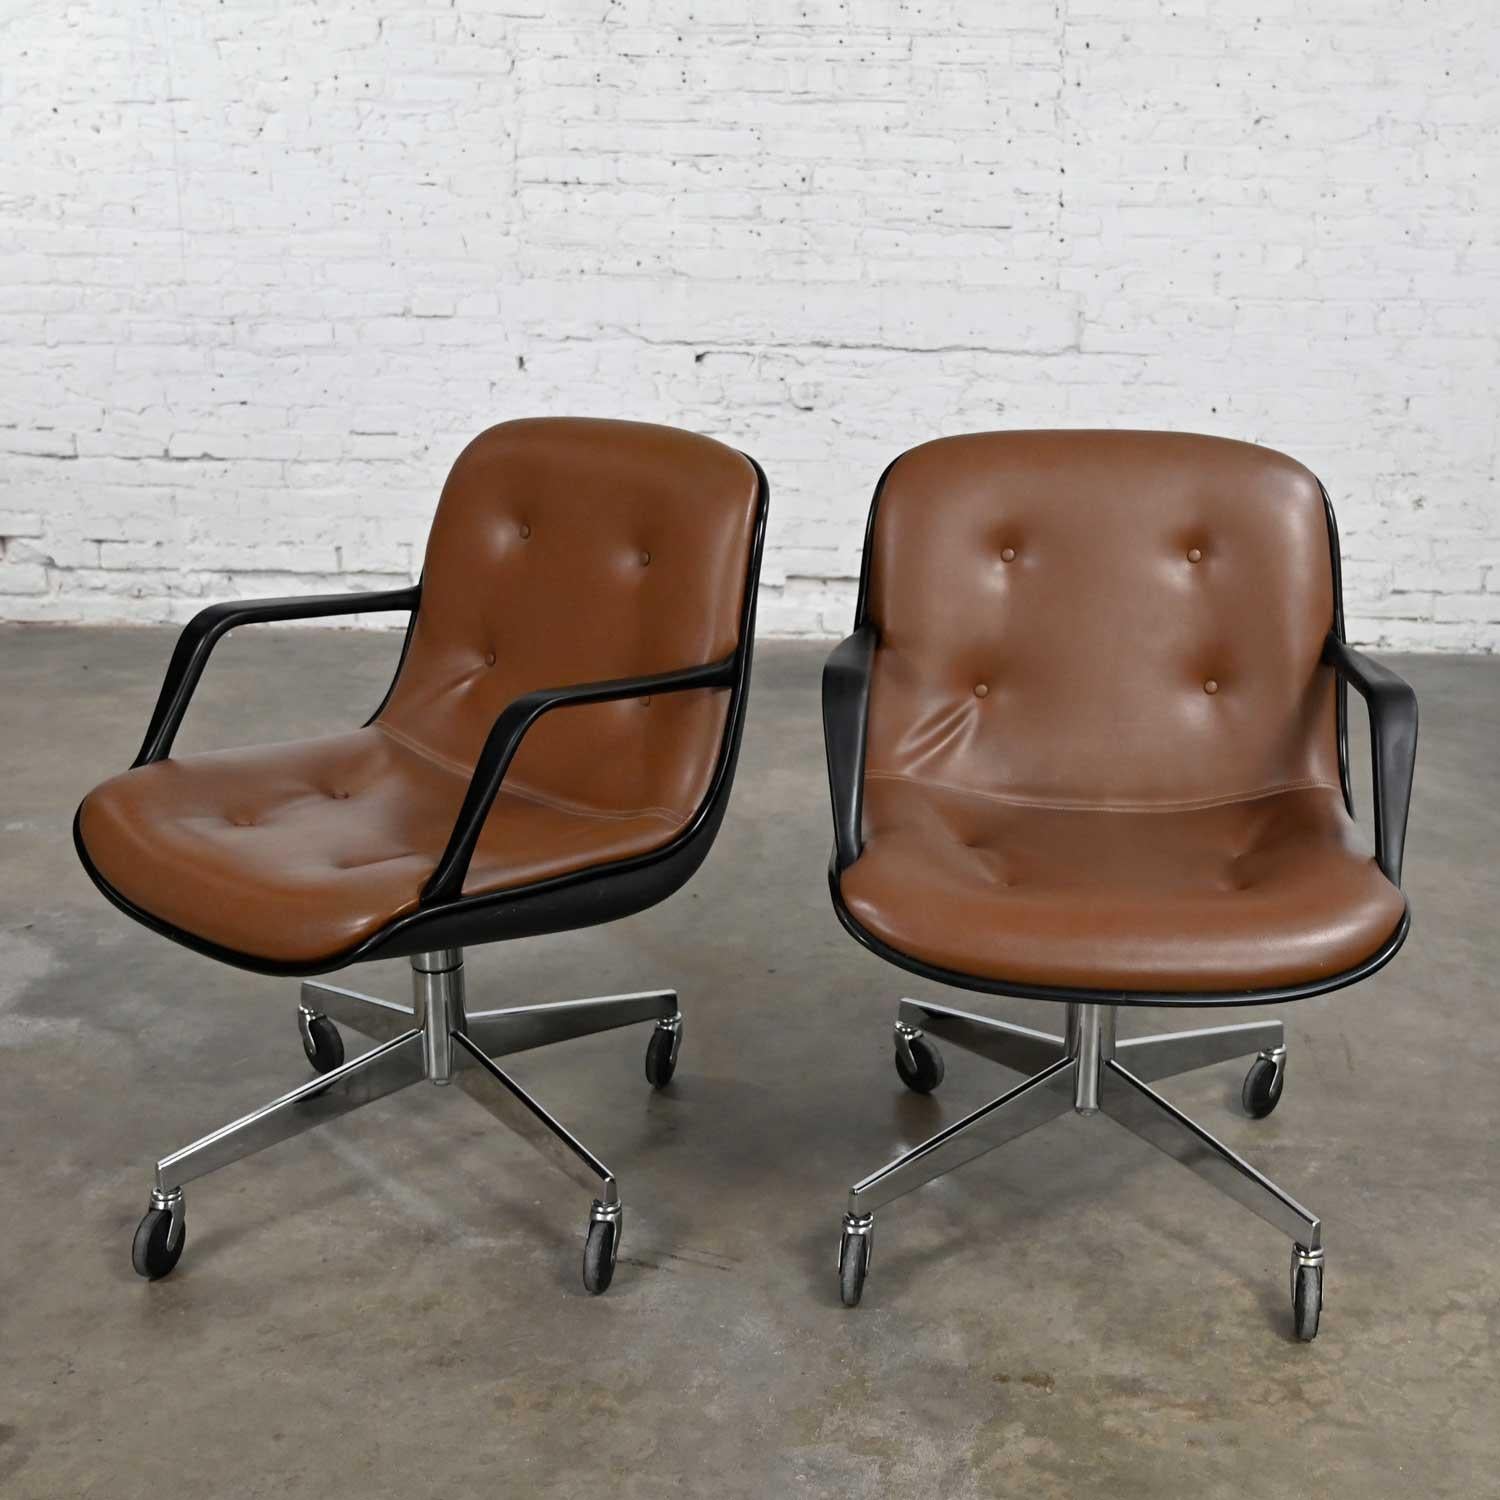 Brown Vinyl Faux Leather Pair Steelcase 451 Rolling Office Chairs Style Pollock For Sale 4